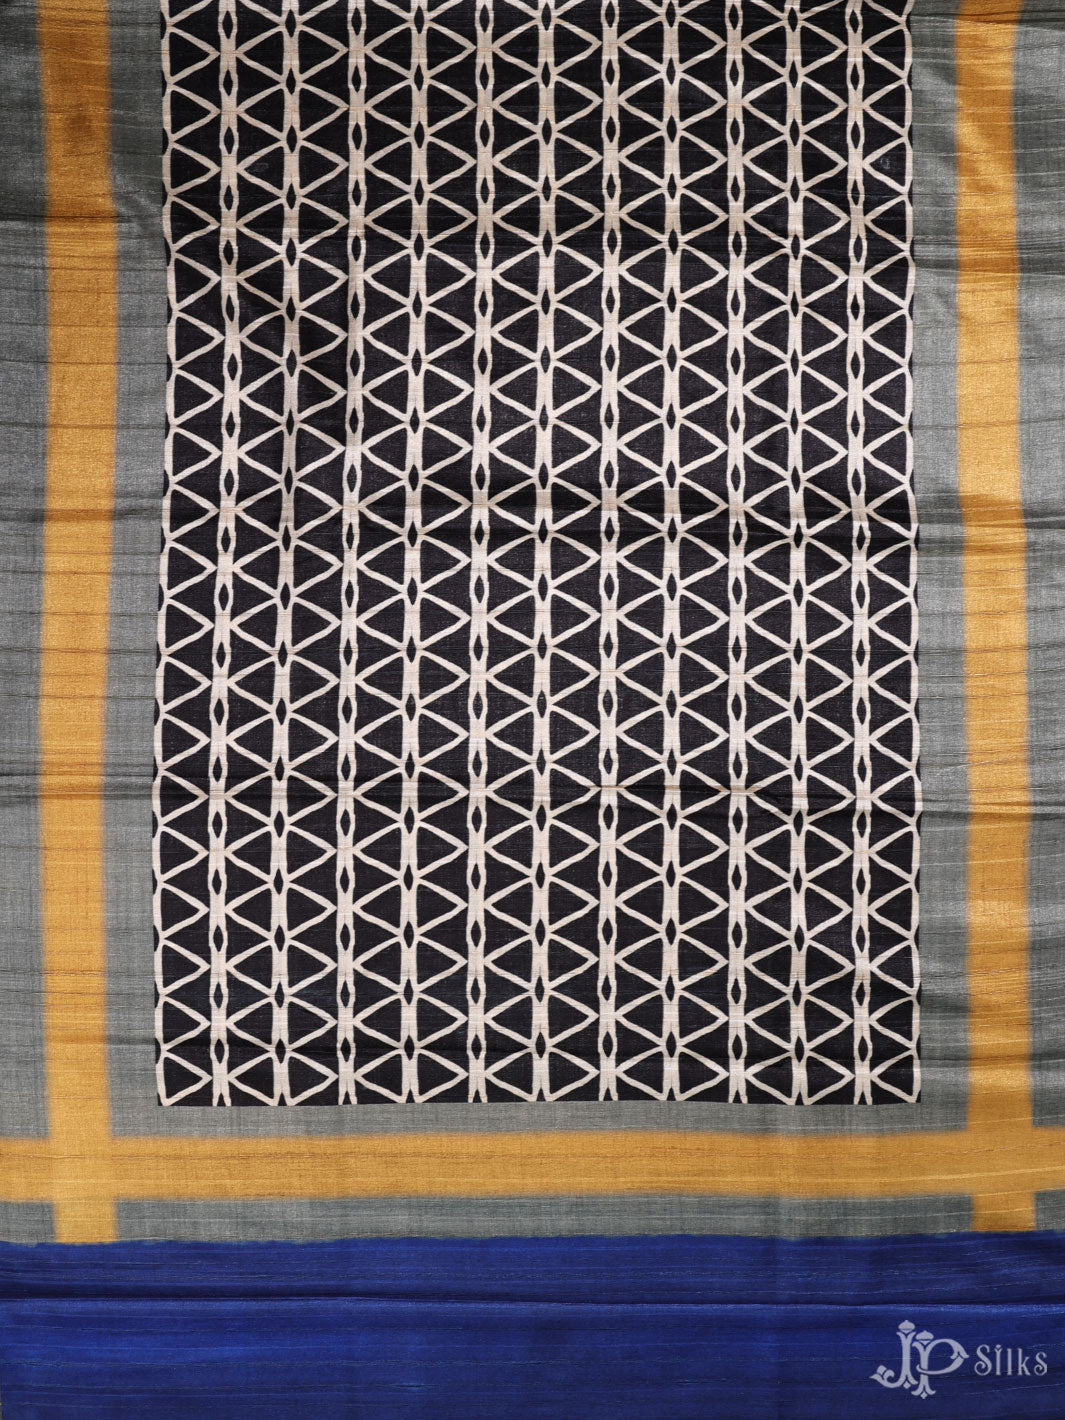 Grey and Gold Tussar Unstiched Chudidhar Material - E1014 - View 5